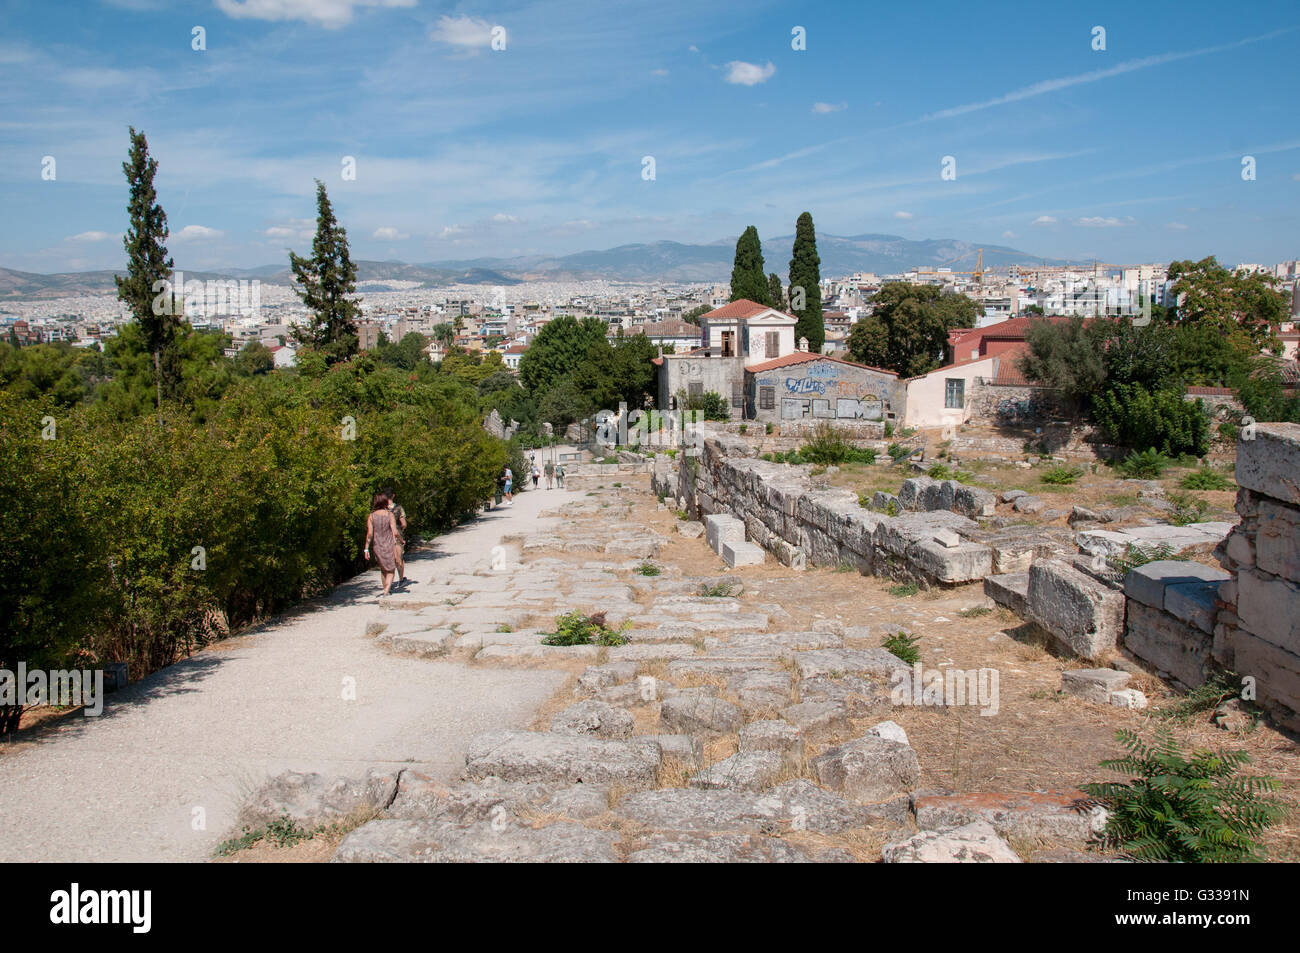 Panoramic view of the city of Athens from Acropolis Hill in Greece. Stock Photo